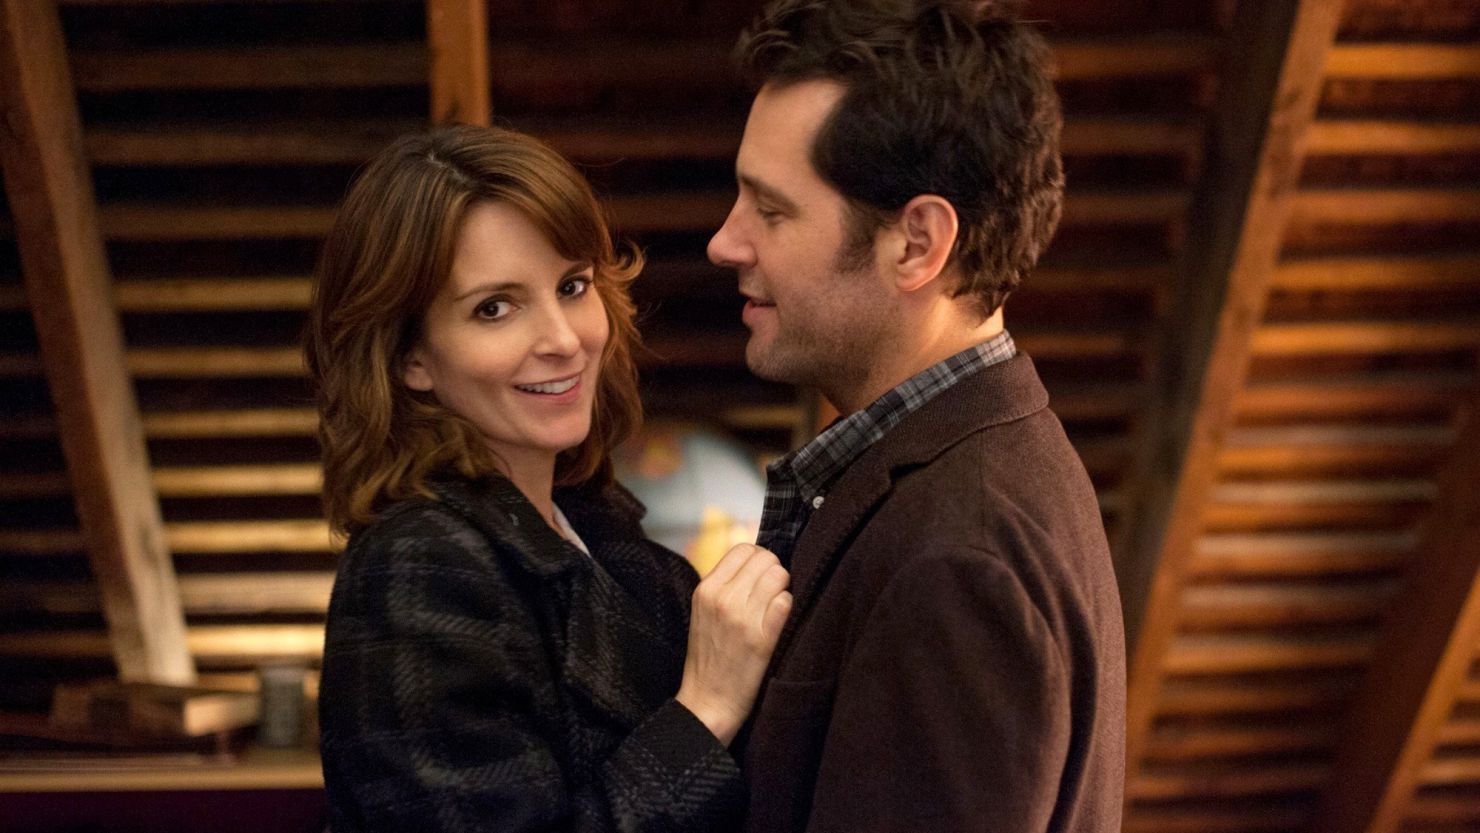 Tina Fey and Paul Rudd star in a new film, "Admission".
